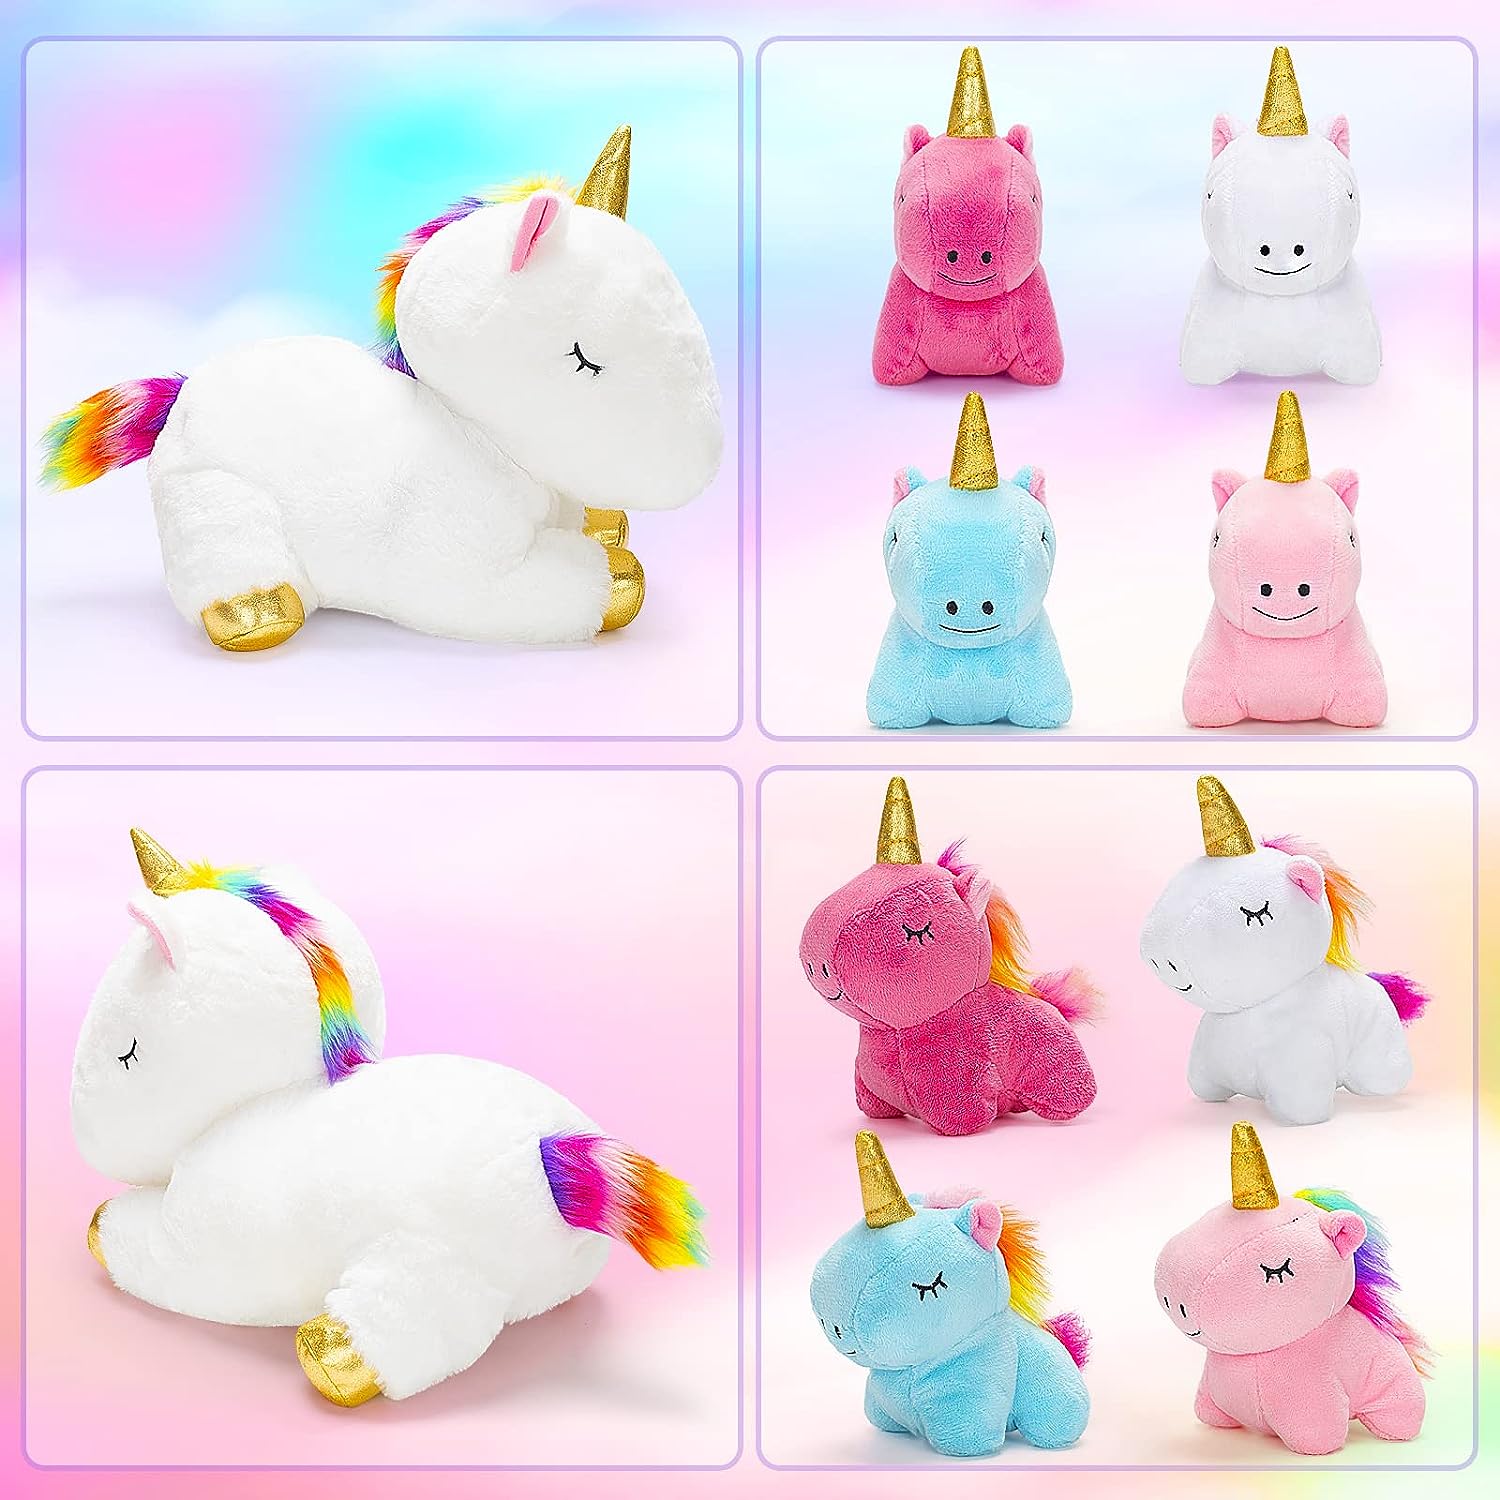 KMUYSL Unicorn Toys for Girls Ages 3 4 5 6 7 8+ Year - Unicorn Mommy Stuffed Animal with 4 Baby Unicorns in Her Tummy, Valentines and Birthday Gifts, Soft Plush Set for Baby, Toddler, Kids